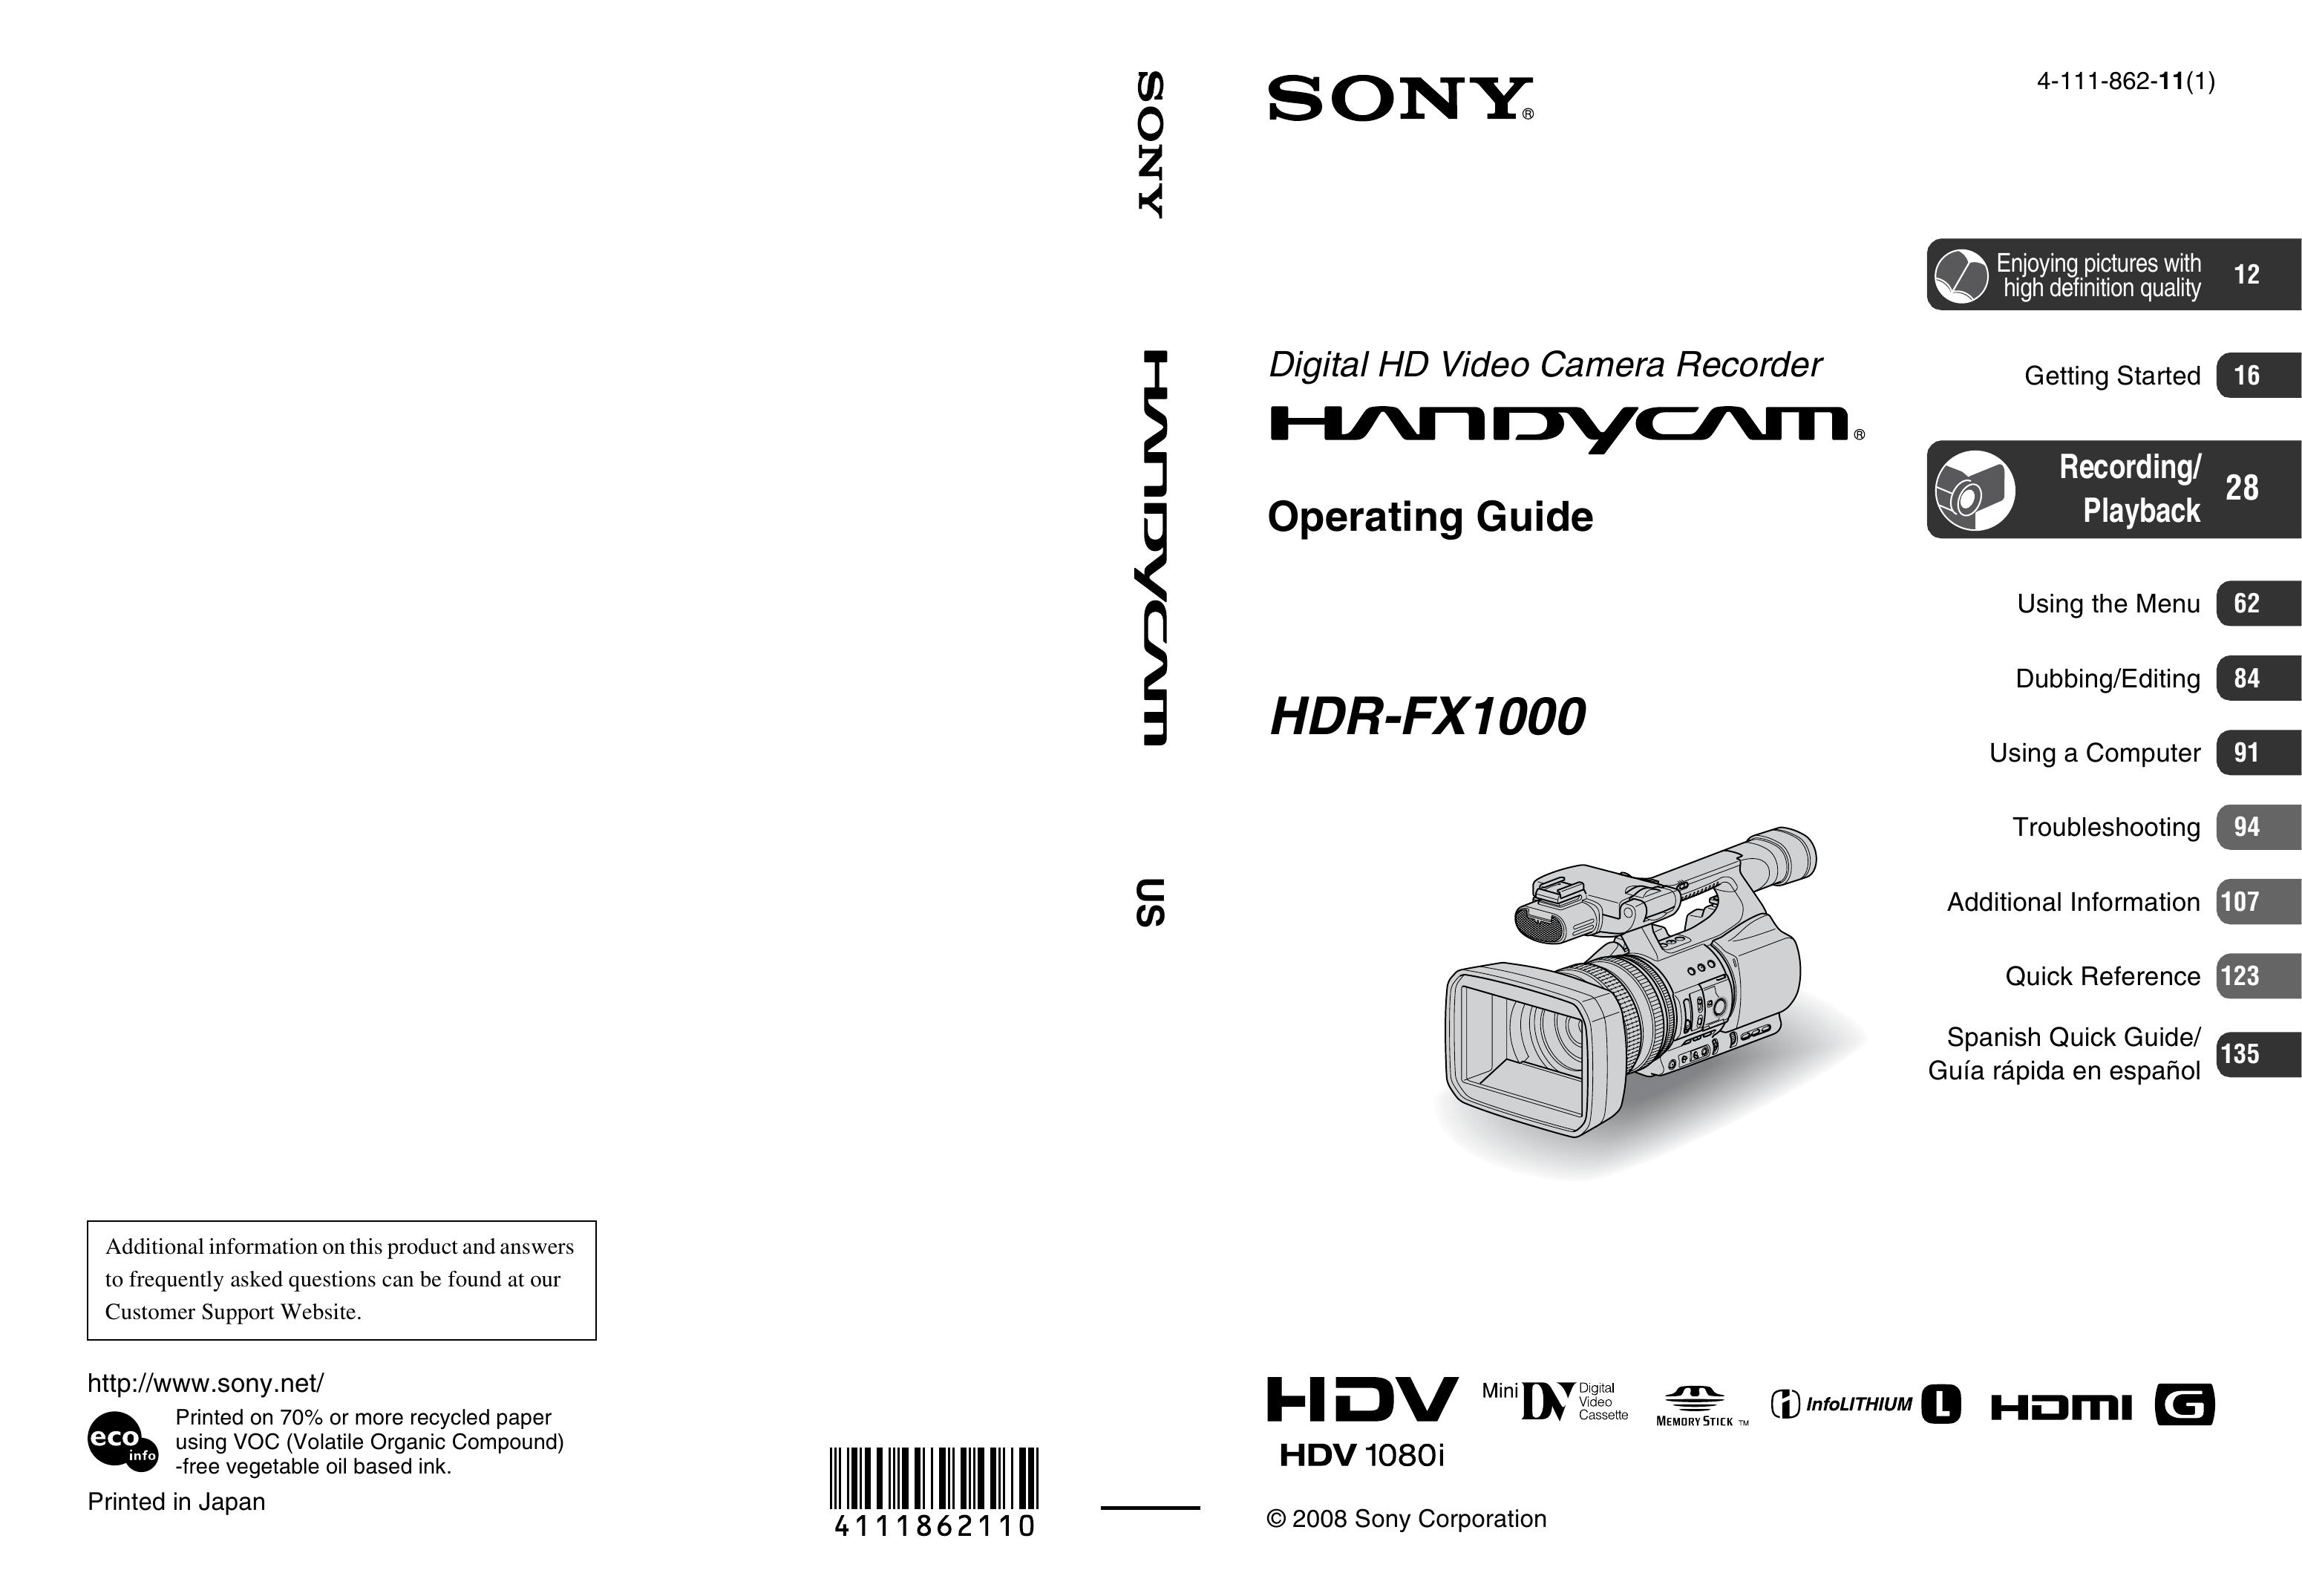 Sony 4-111-862-11(1) Camcorder User Manual